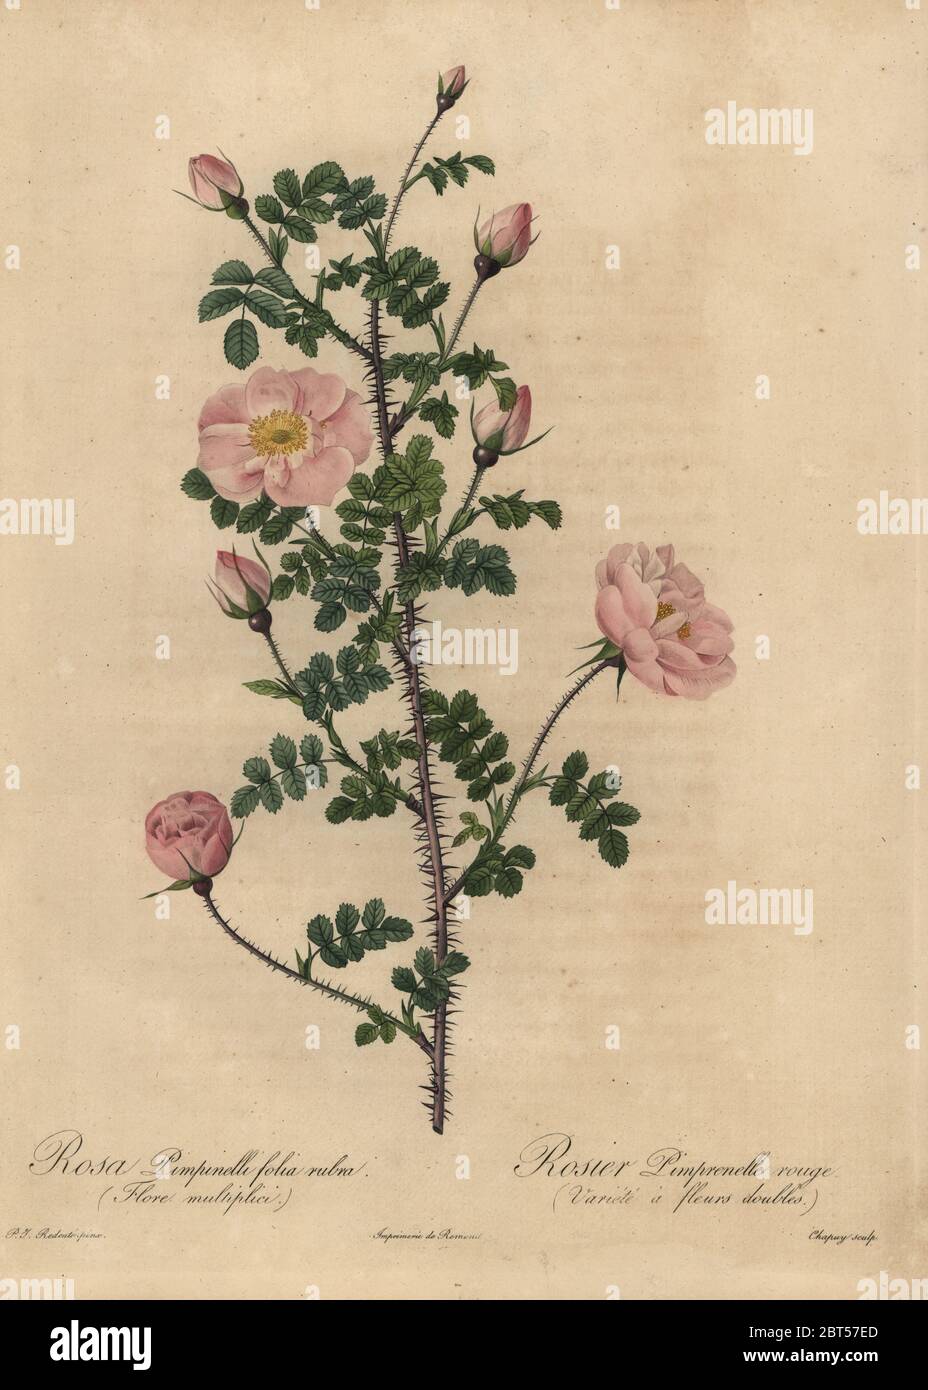 Pink Burnet rose, Rosa pimpinelli folia rubra (flore multiplici), Rosier Pimprenelle rouge variete a fleurs doubles. Stipple copperplate engraving by Jean Baptiste Chapuy handcoloured a la poupee after a botanical illustration by Pierre-Joseph Redoute from the first folio edition of Les Roses, Firmin Didot, Paris, 1817. Stock Photo